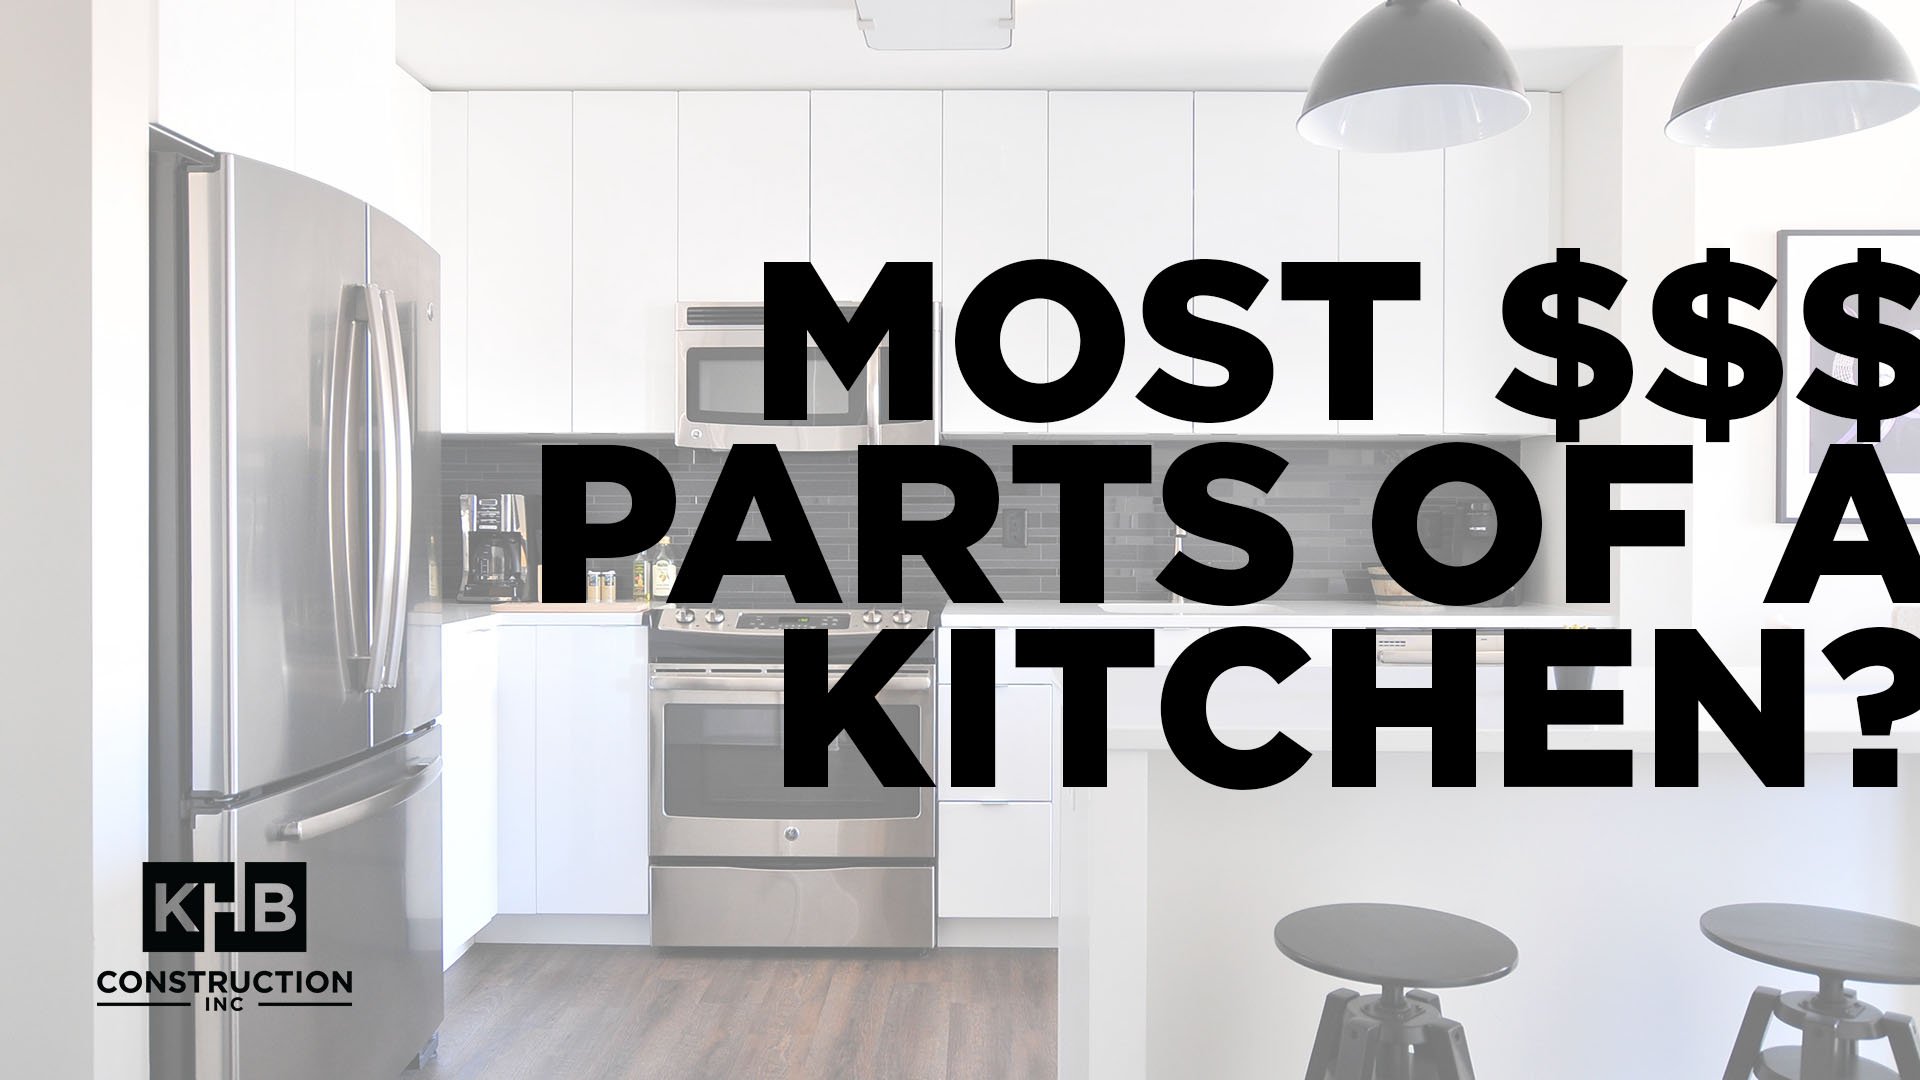 The Most Expensive Part of a Kitchen